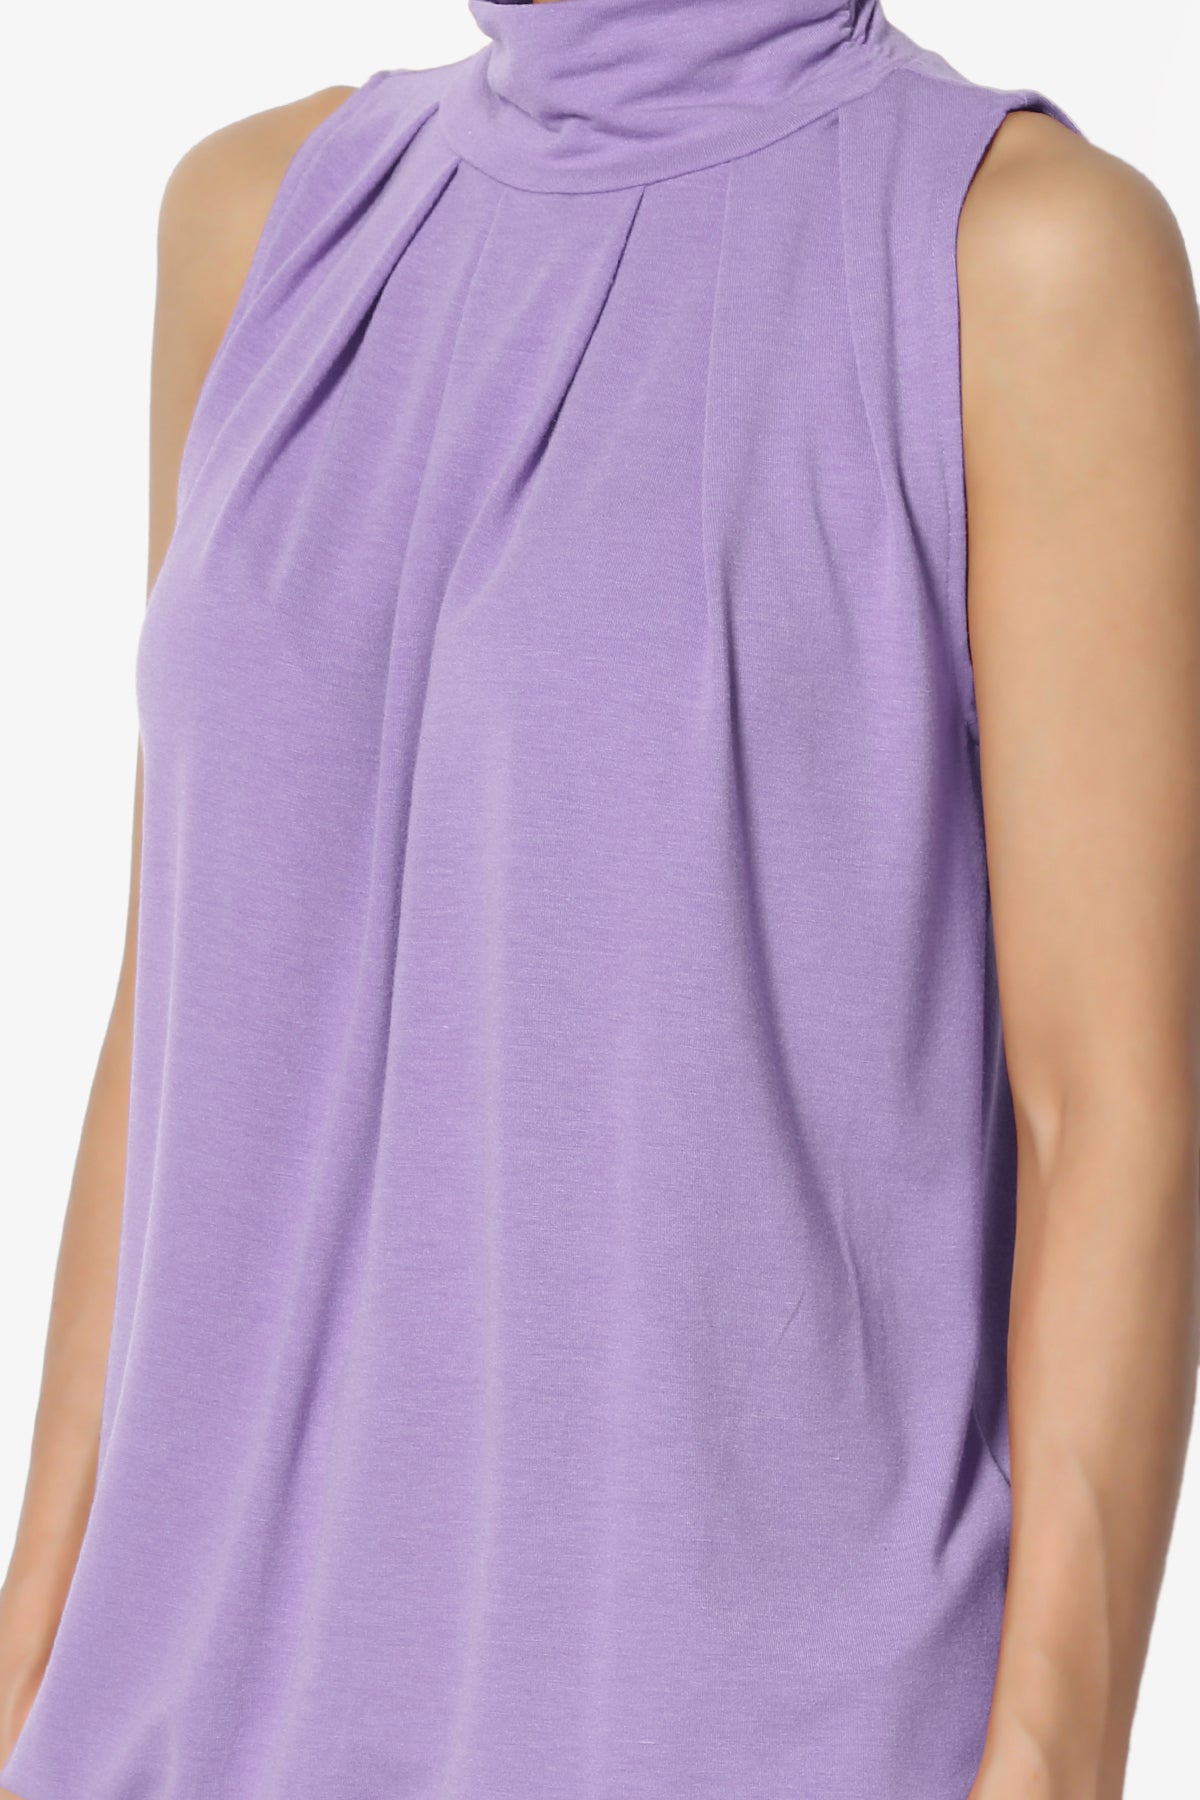 Load image into Gallery viewer, Jibbitz Sleeveless Mock Neck Pleated Top LAVENDER_5
